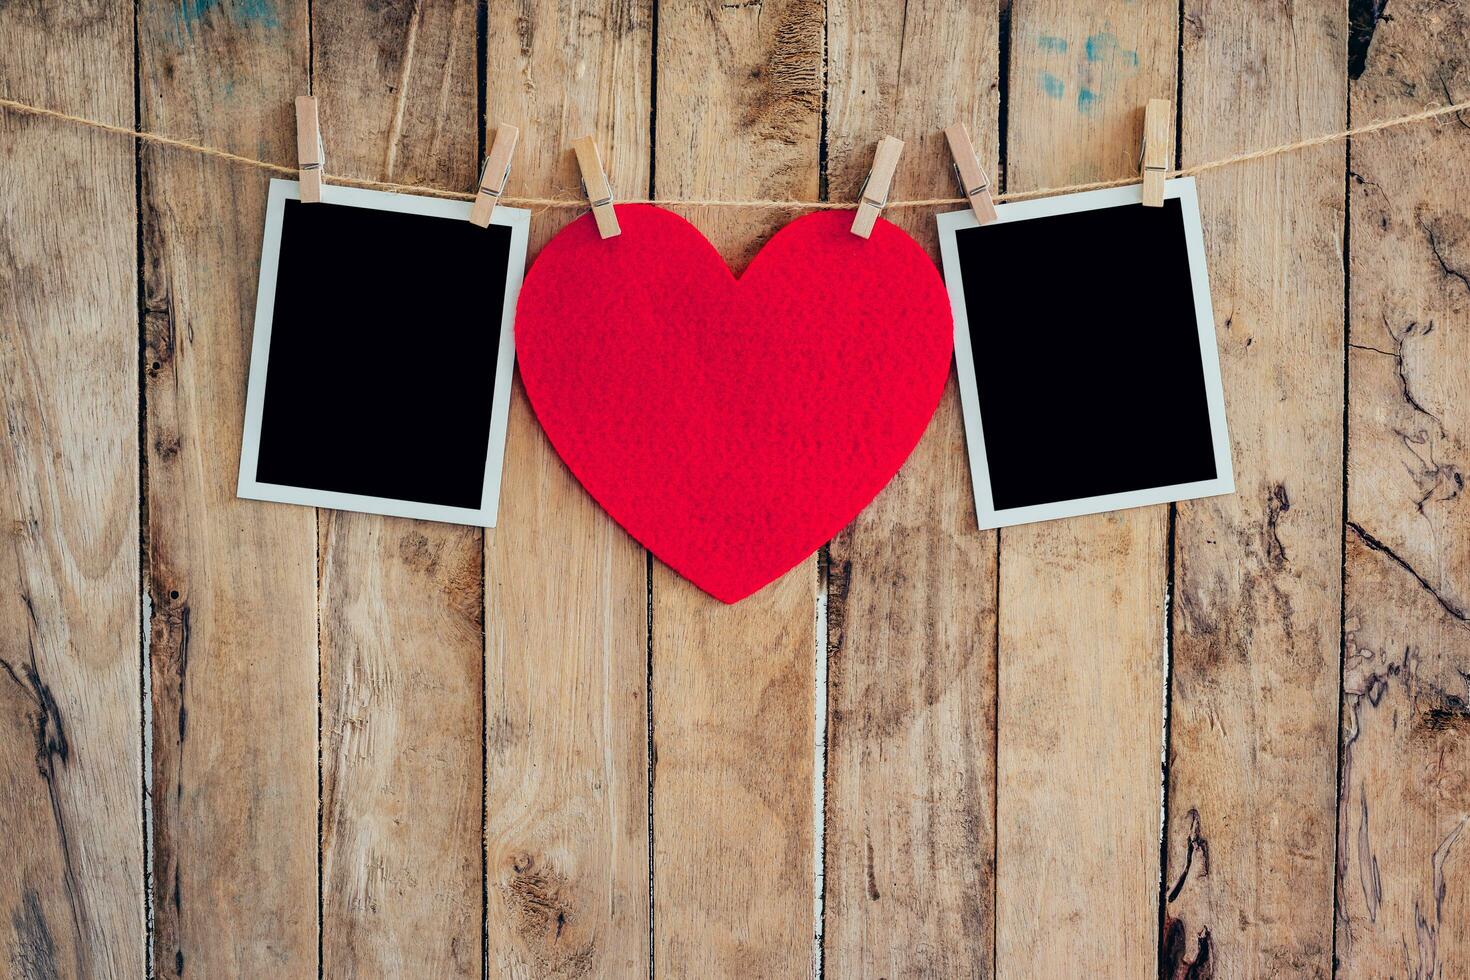 Red heart and two photo frame hanging on clothesline rope with wooden background.